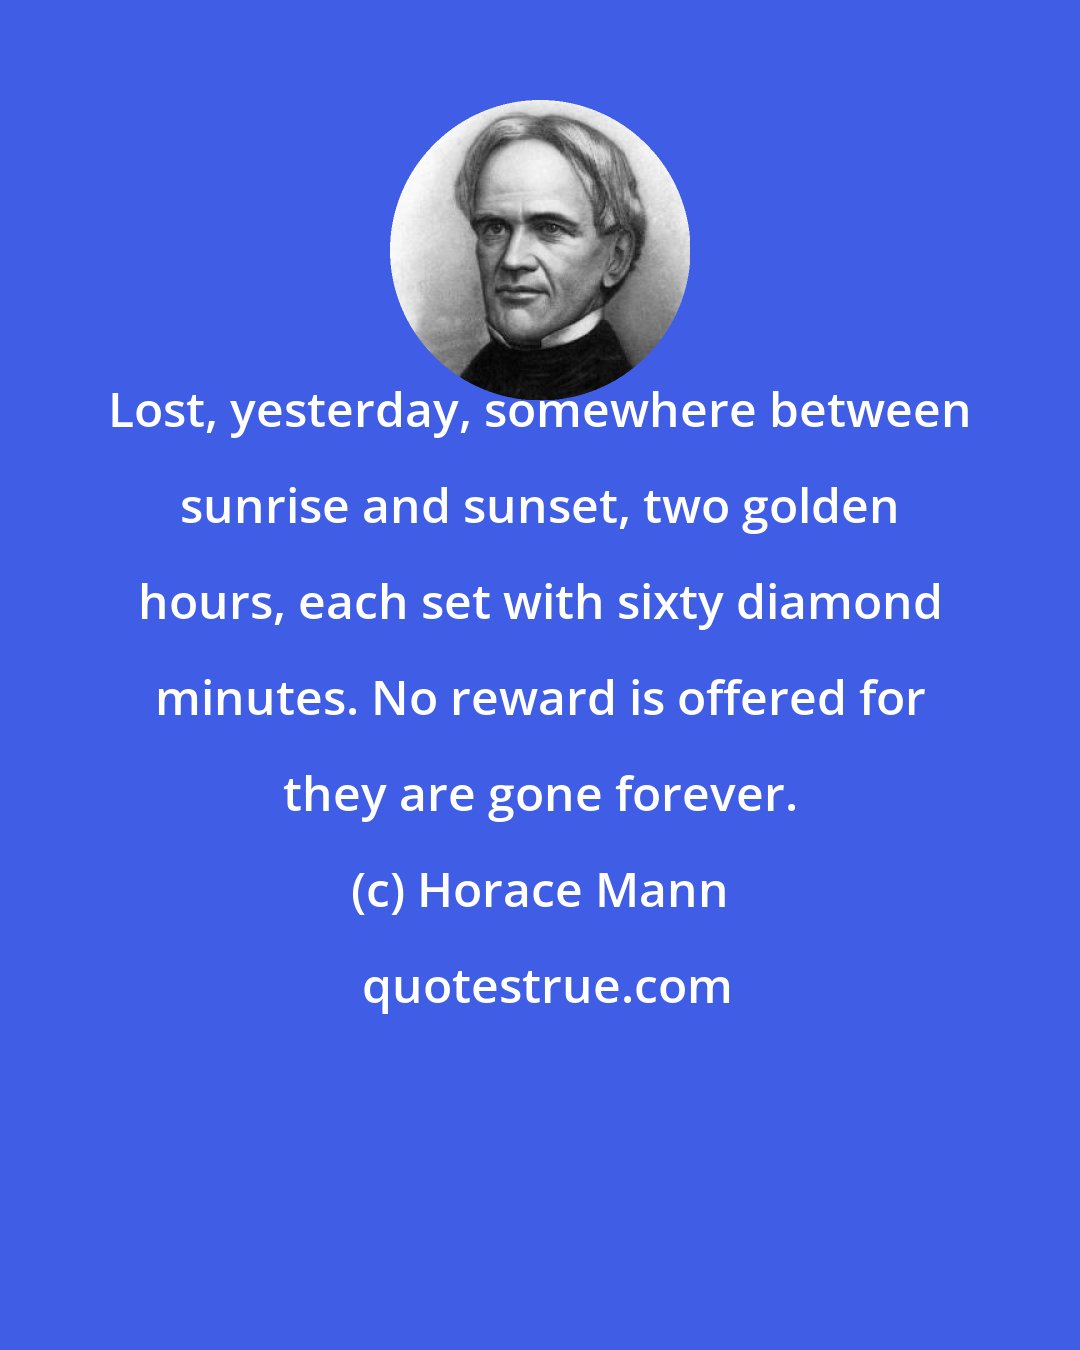 Horace Mann: Lost, yesterday, somewhere between sunrise and sunset, two golden hours, each set with sixty diamond minutes. No reward is offered for they are gone forever.